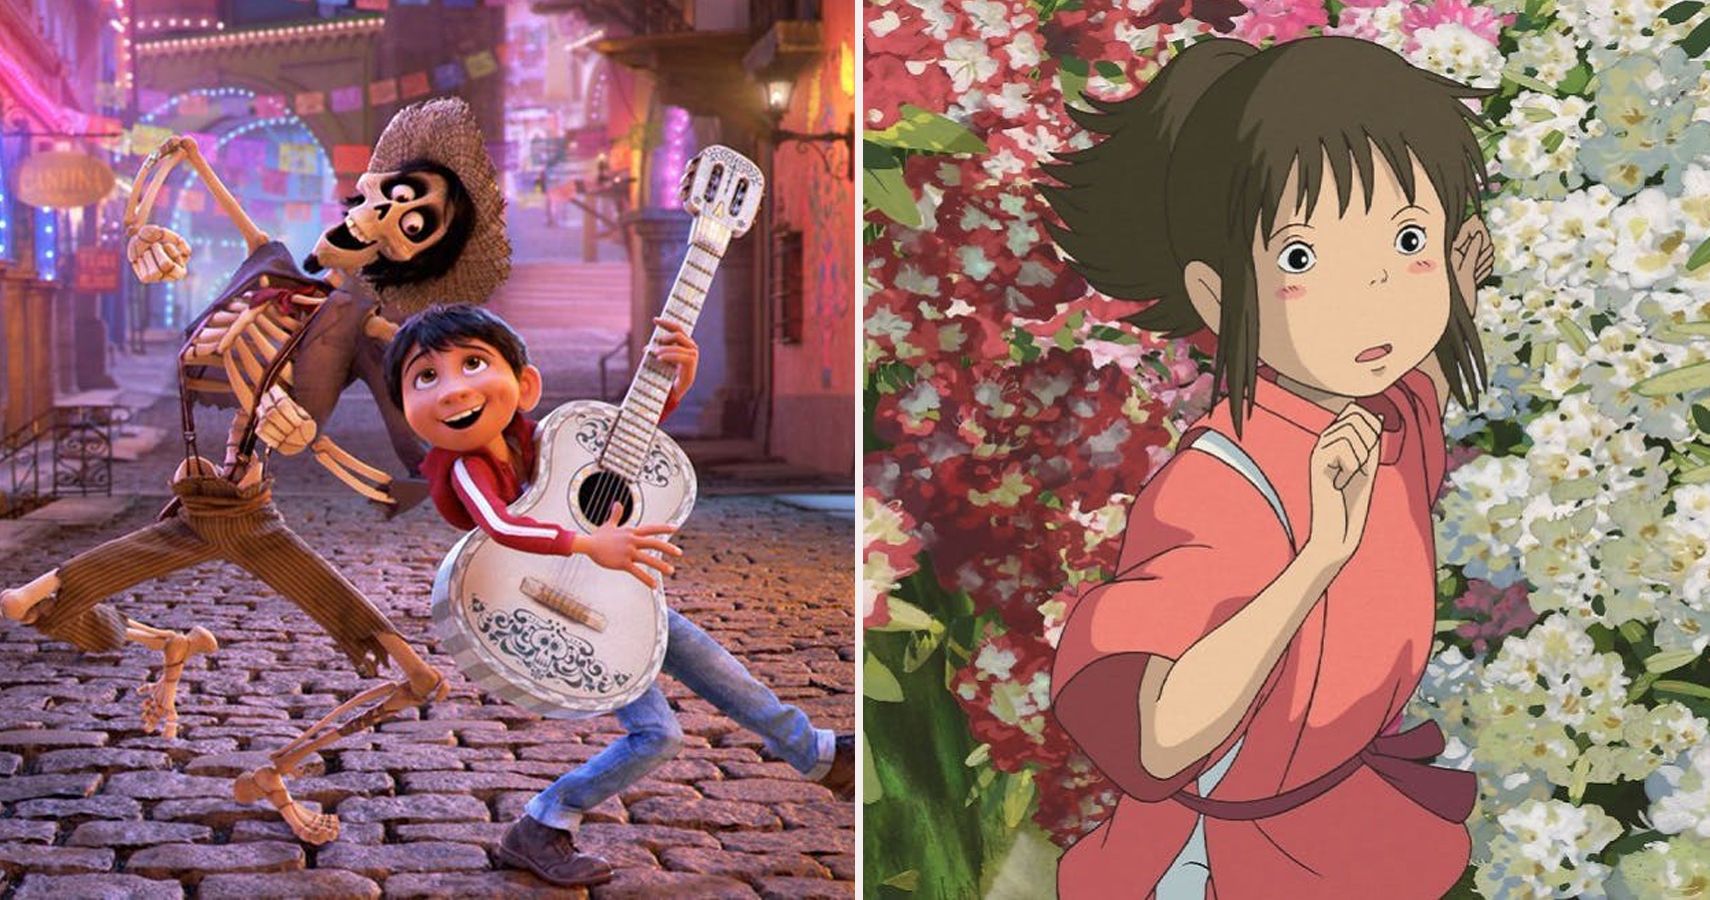 The 15 Best Animated Movies Of All Time (According To IMDb)